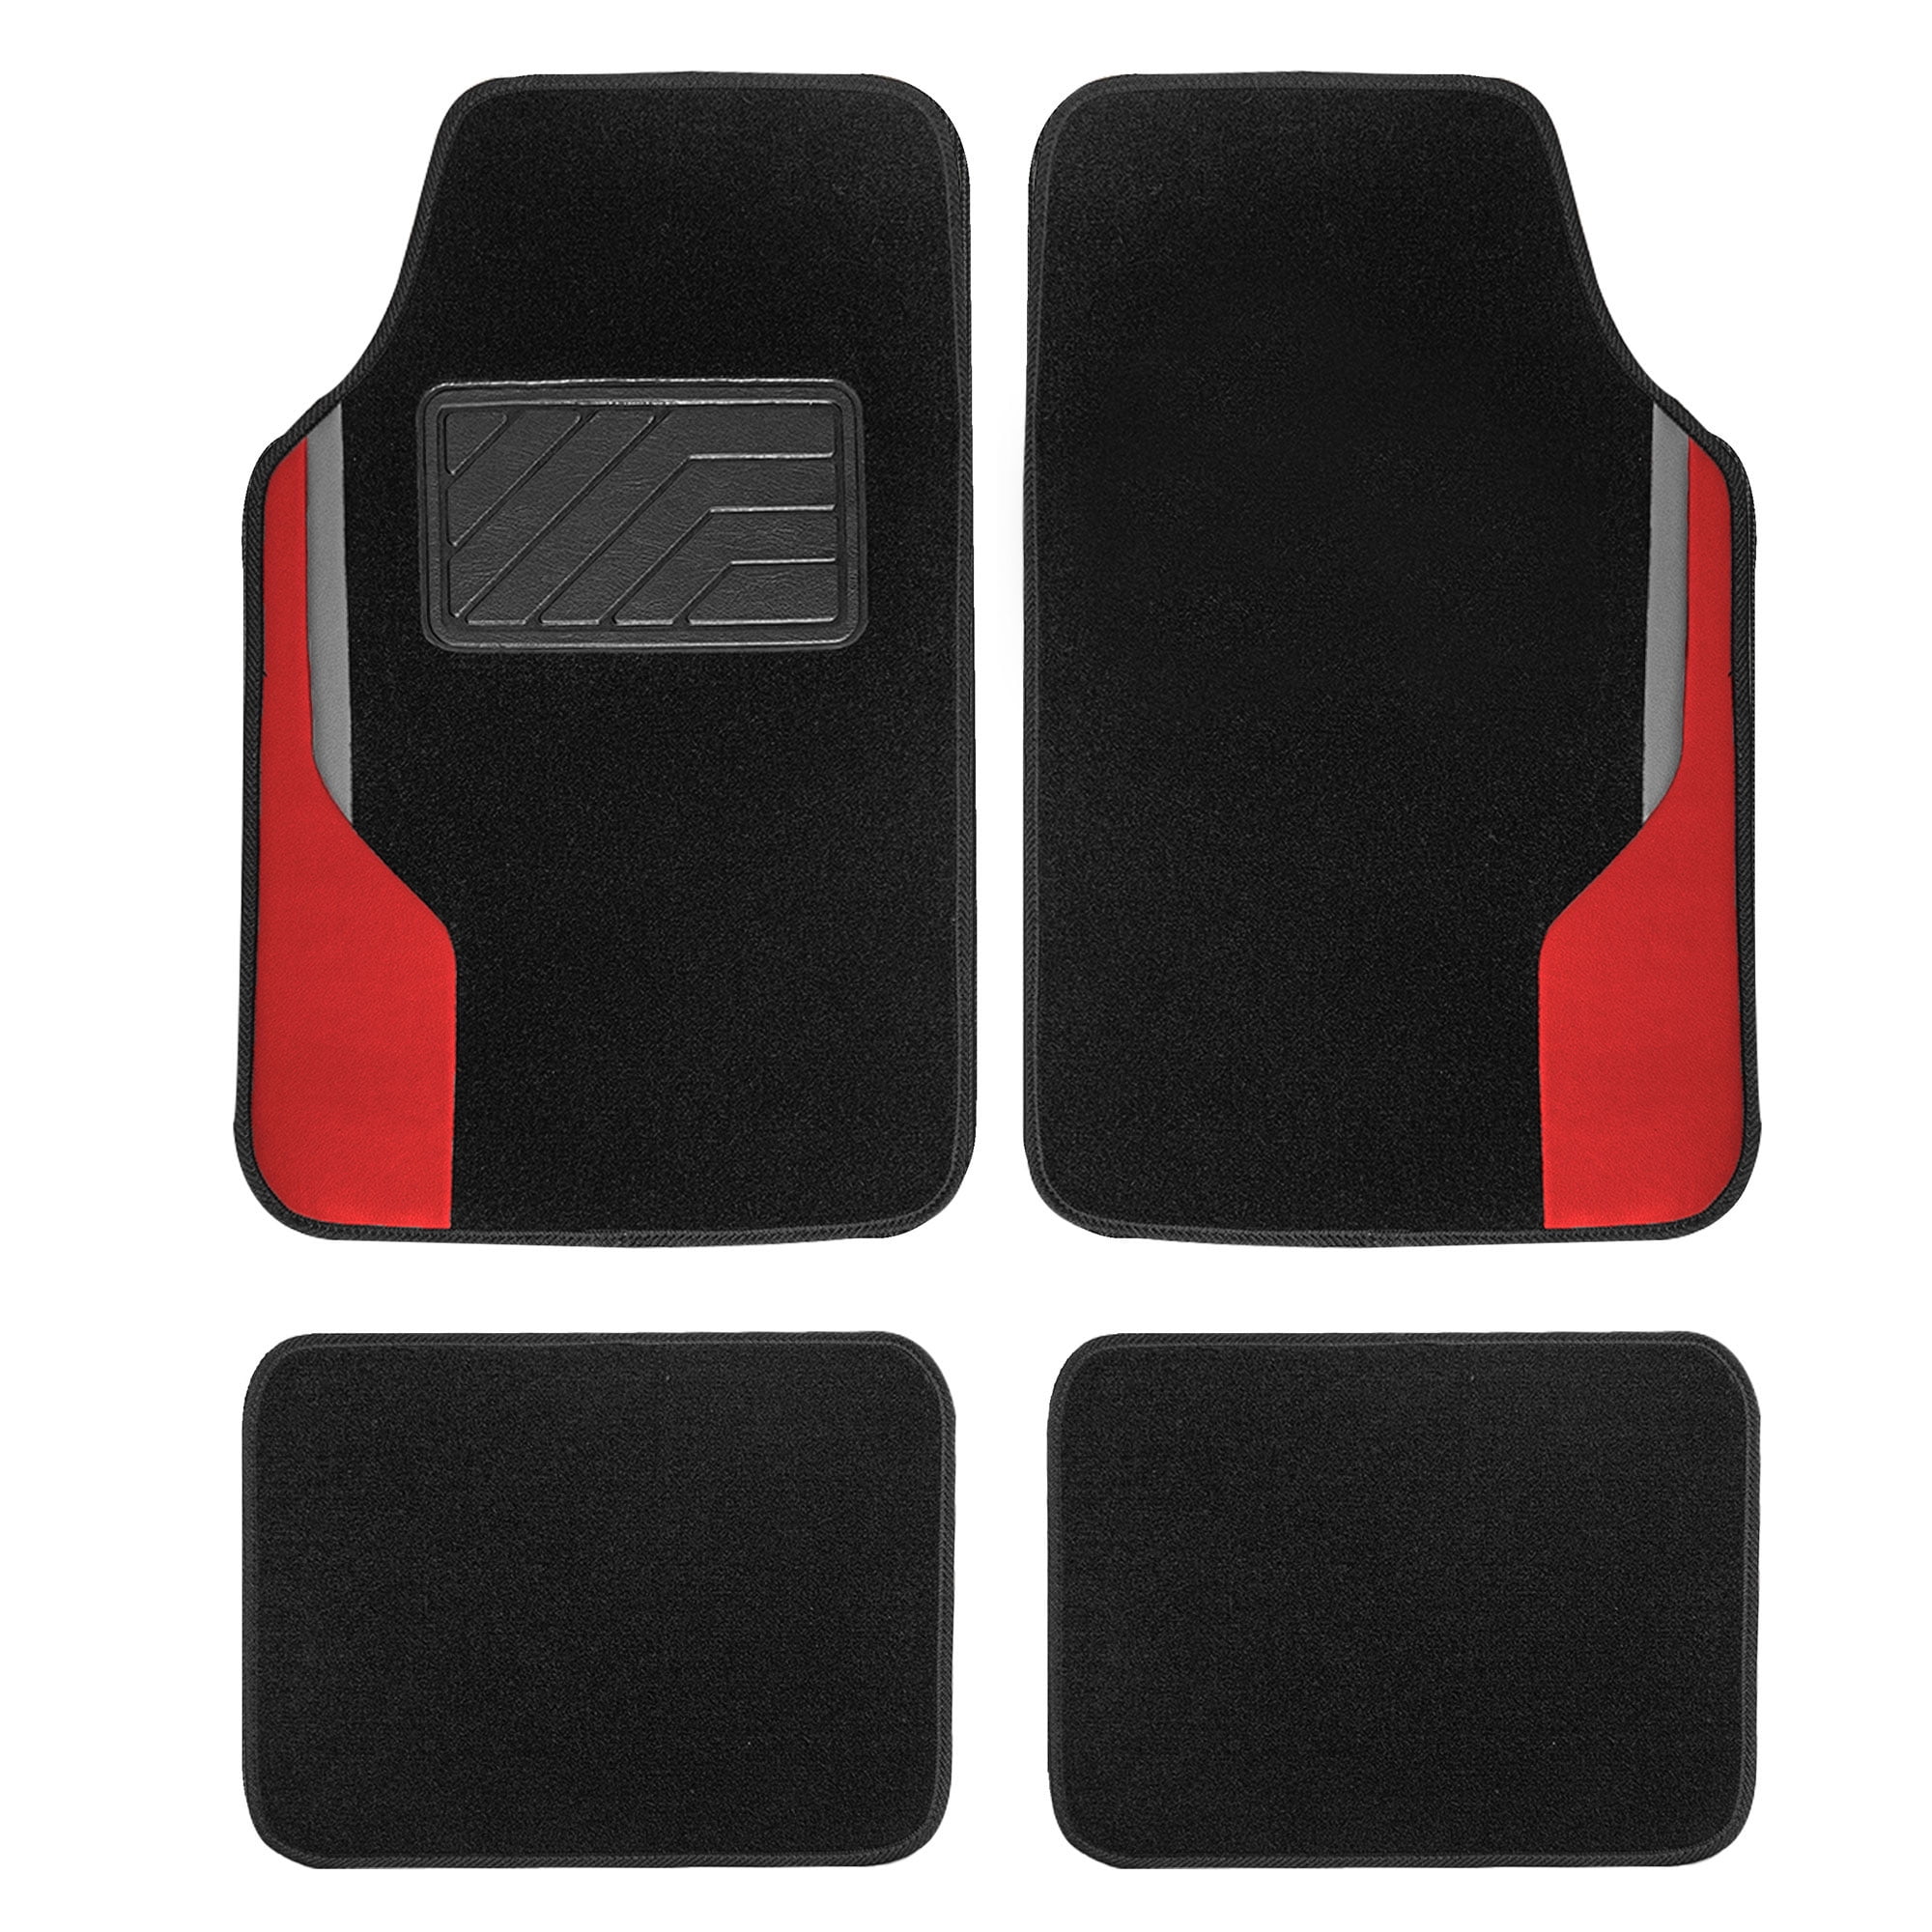 Black Leather Trim 5mm Heavy Duty Rubber Car Floor Mats to fit Ford Galaxy 06>